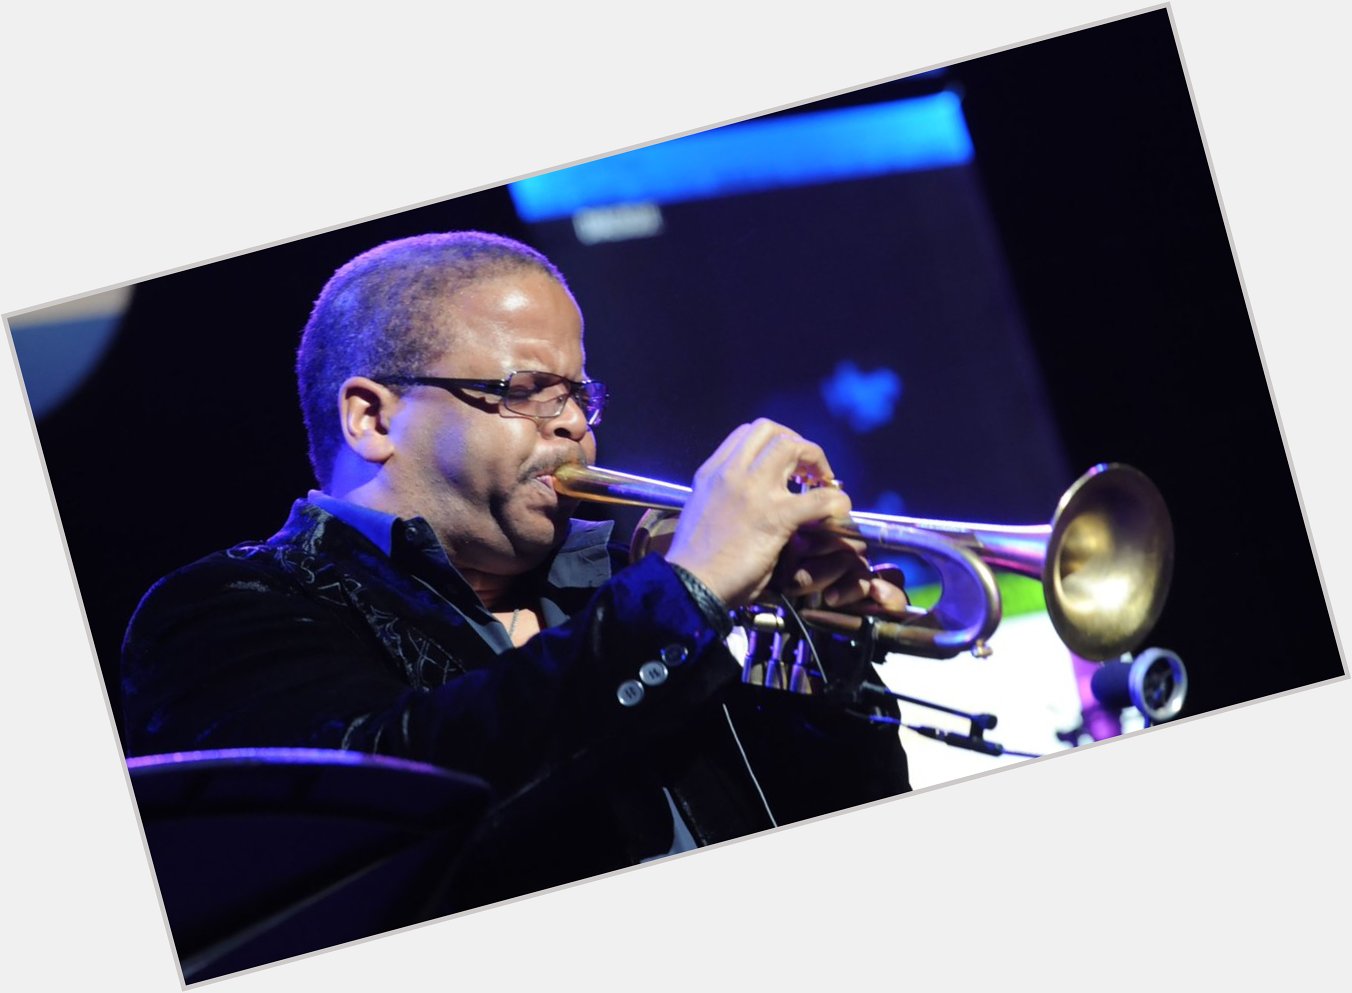 HaPpY BirThDaY!! to 4 - times GRAMMY Winner Terence Blanchard. 